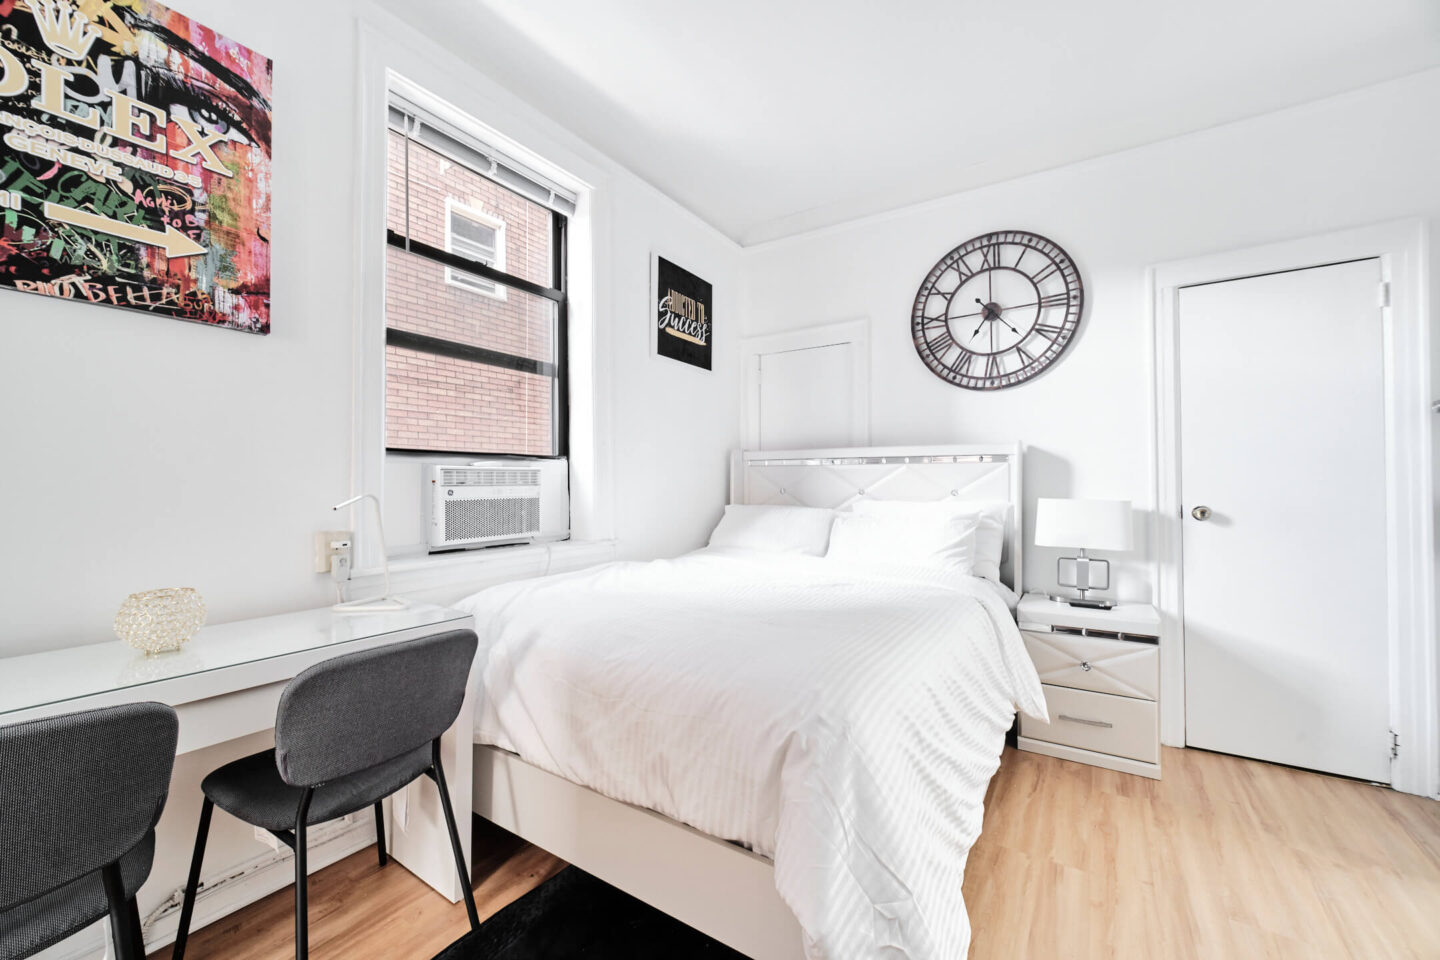 41-32 76th St, East Elmhurst, NY 11373 - Apt 3 - Real Estate Photography - AirBnB Listing